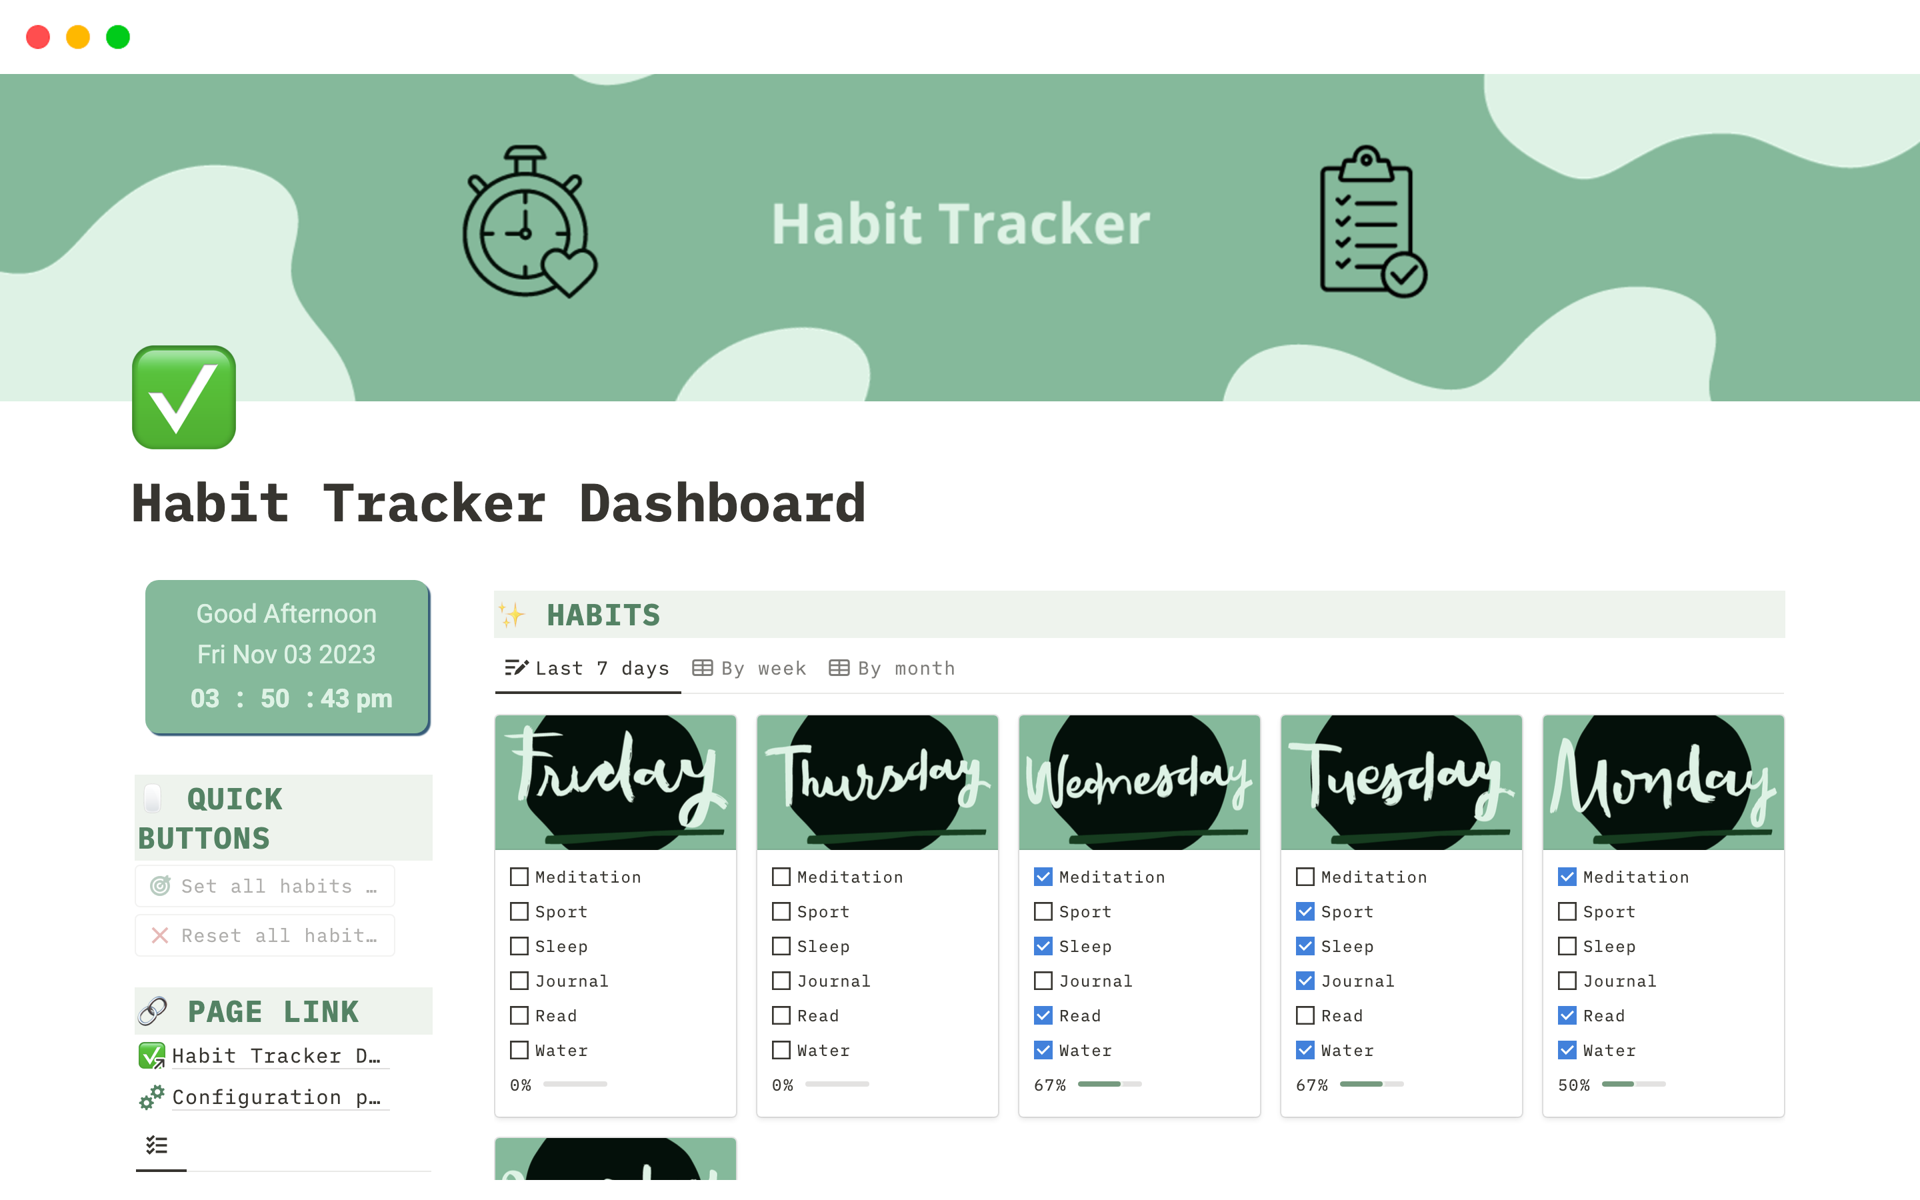 The Simple Habit Tracker is your adaptable ally for achieving lasting change, featuring quick buttons, detailed reports, and an optional graph, all wrapped in an easy-to-use design.